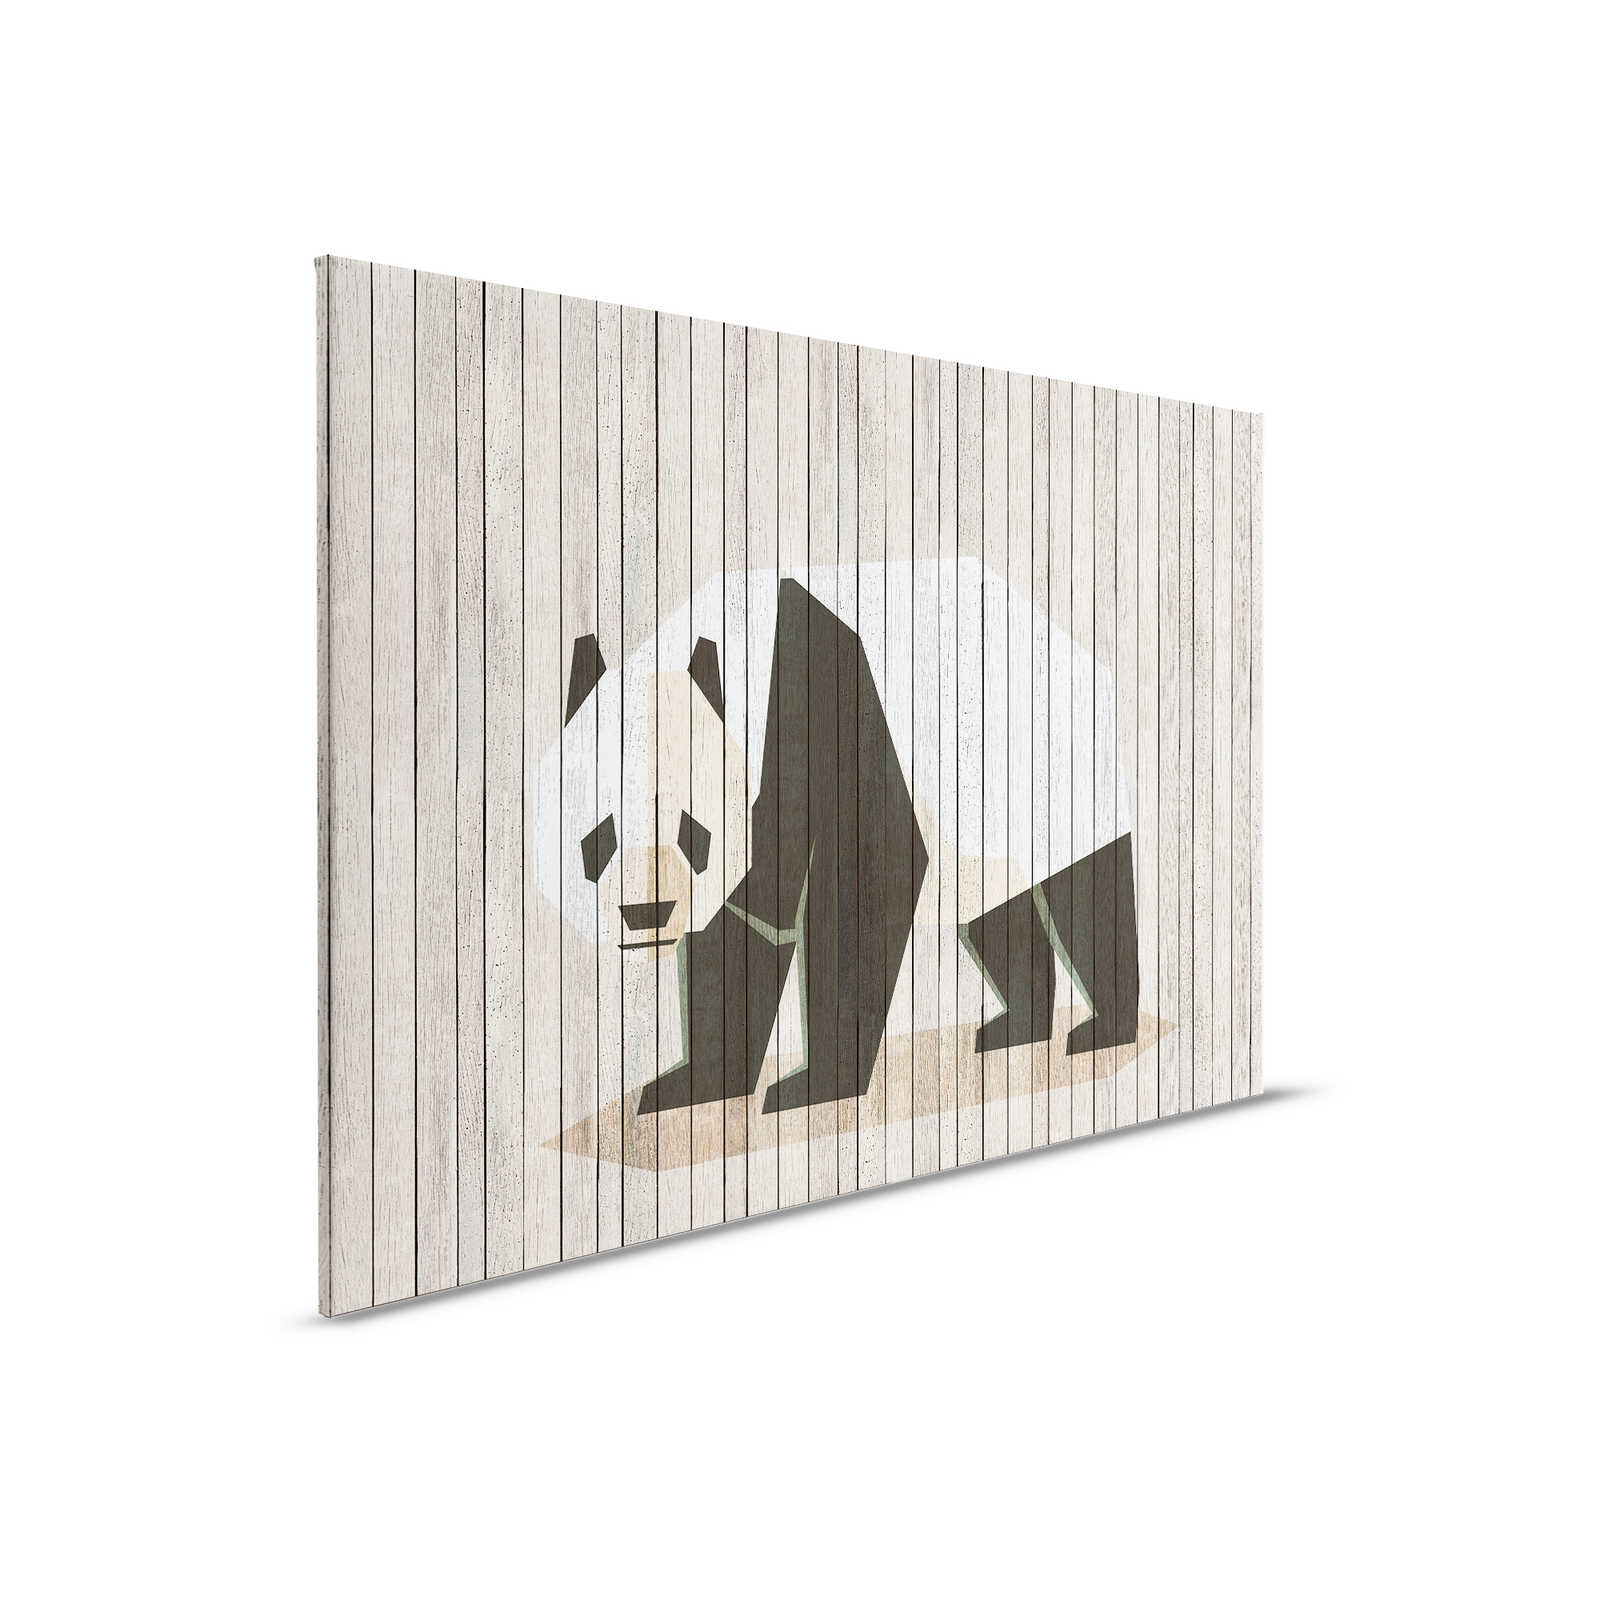         Born to Be Wild 2 - Canvas painting on wood panel structure with panda & board wall - 0.90 m x 0.60 m
    